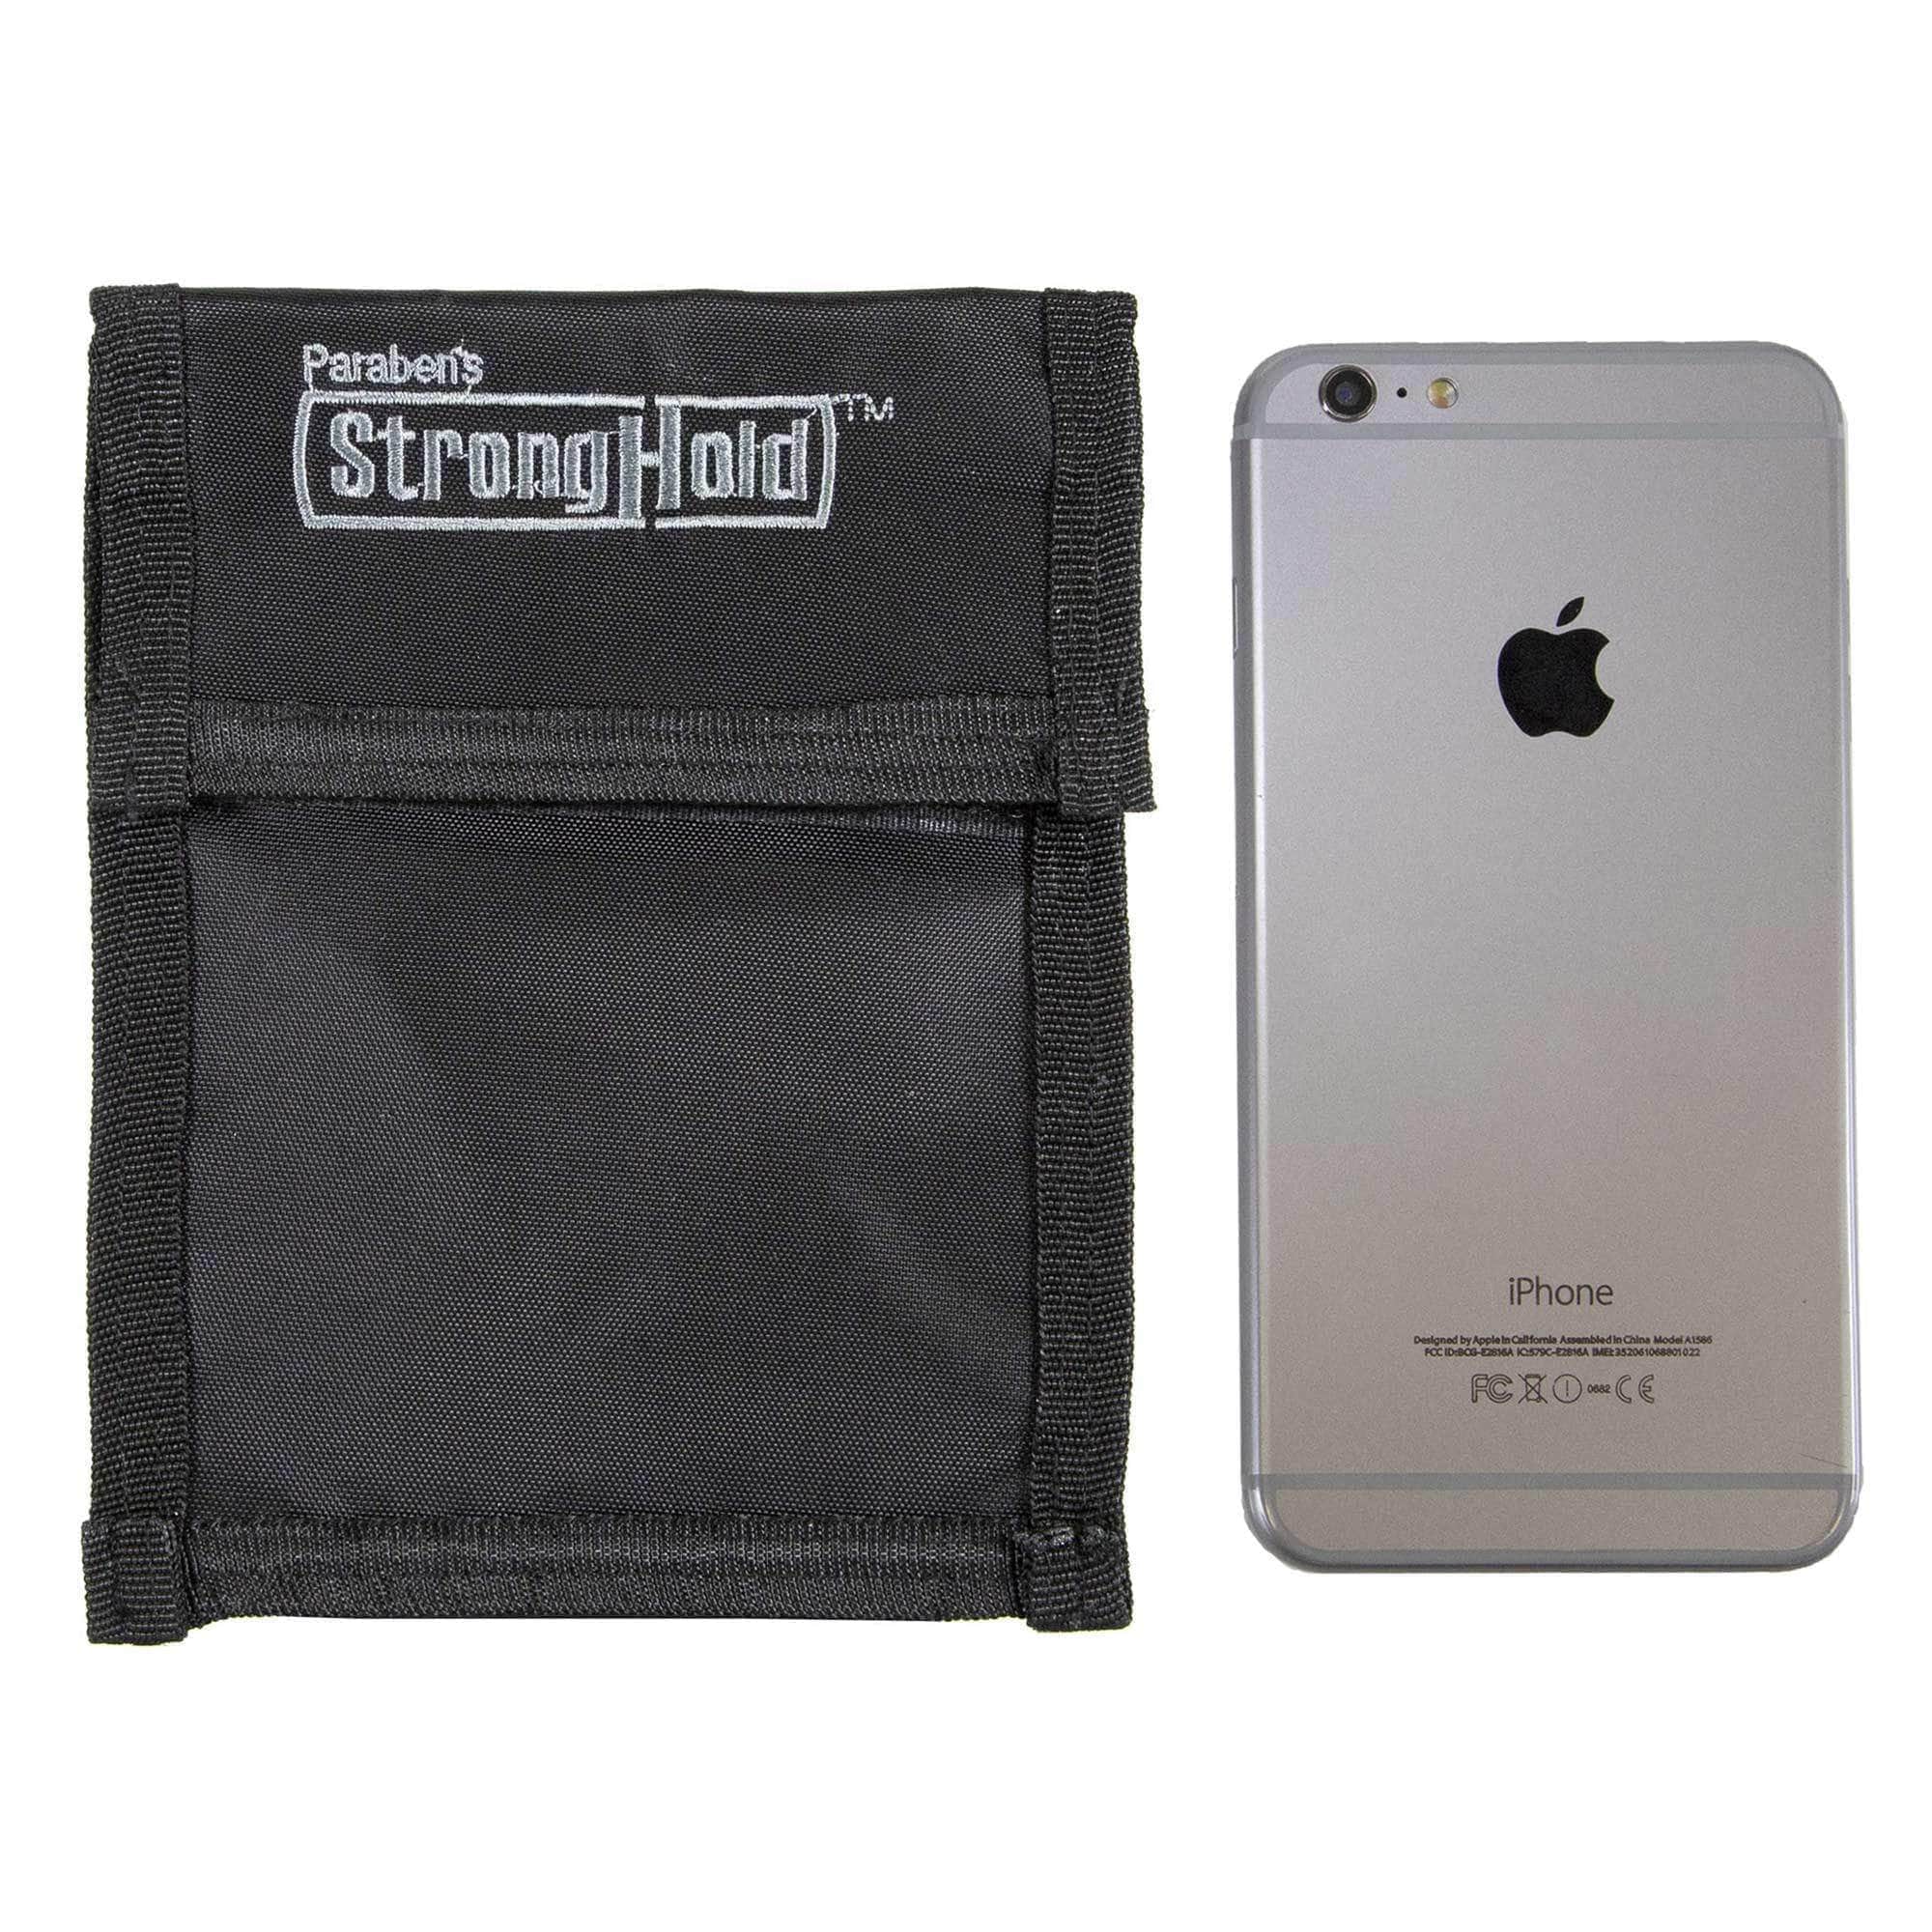 ID Stronghold Shielded Bag Phone Small Cell Phone Stronghold Bag 5"x6" - Black